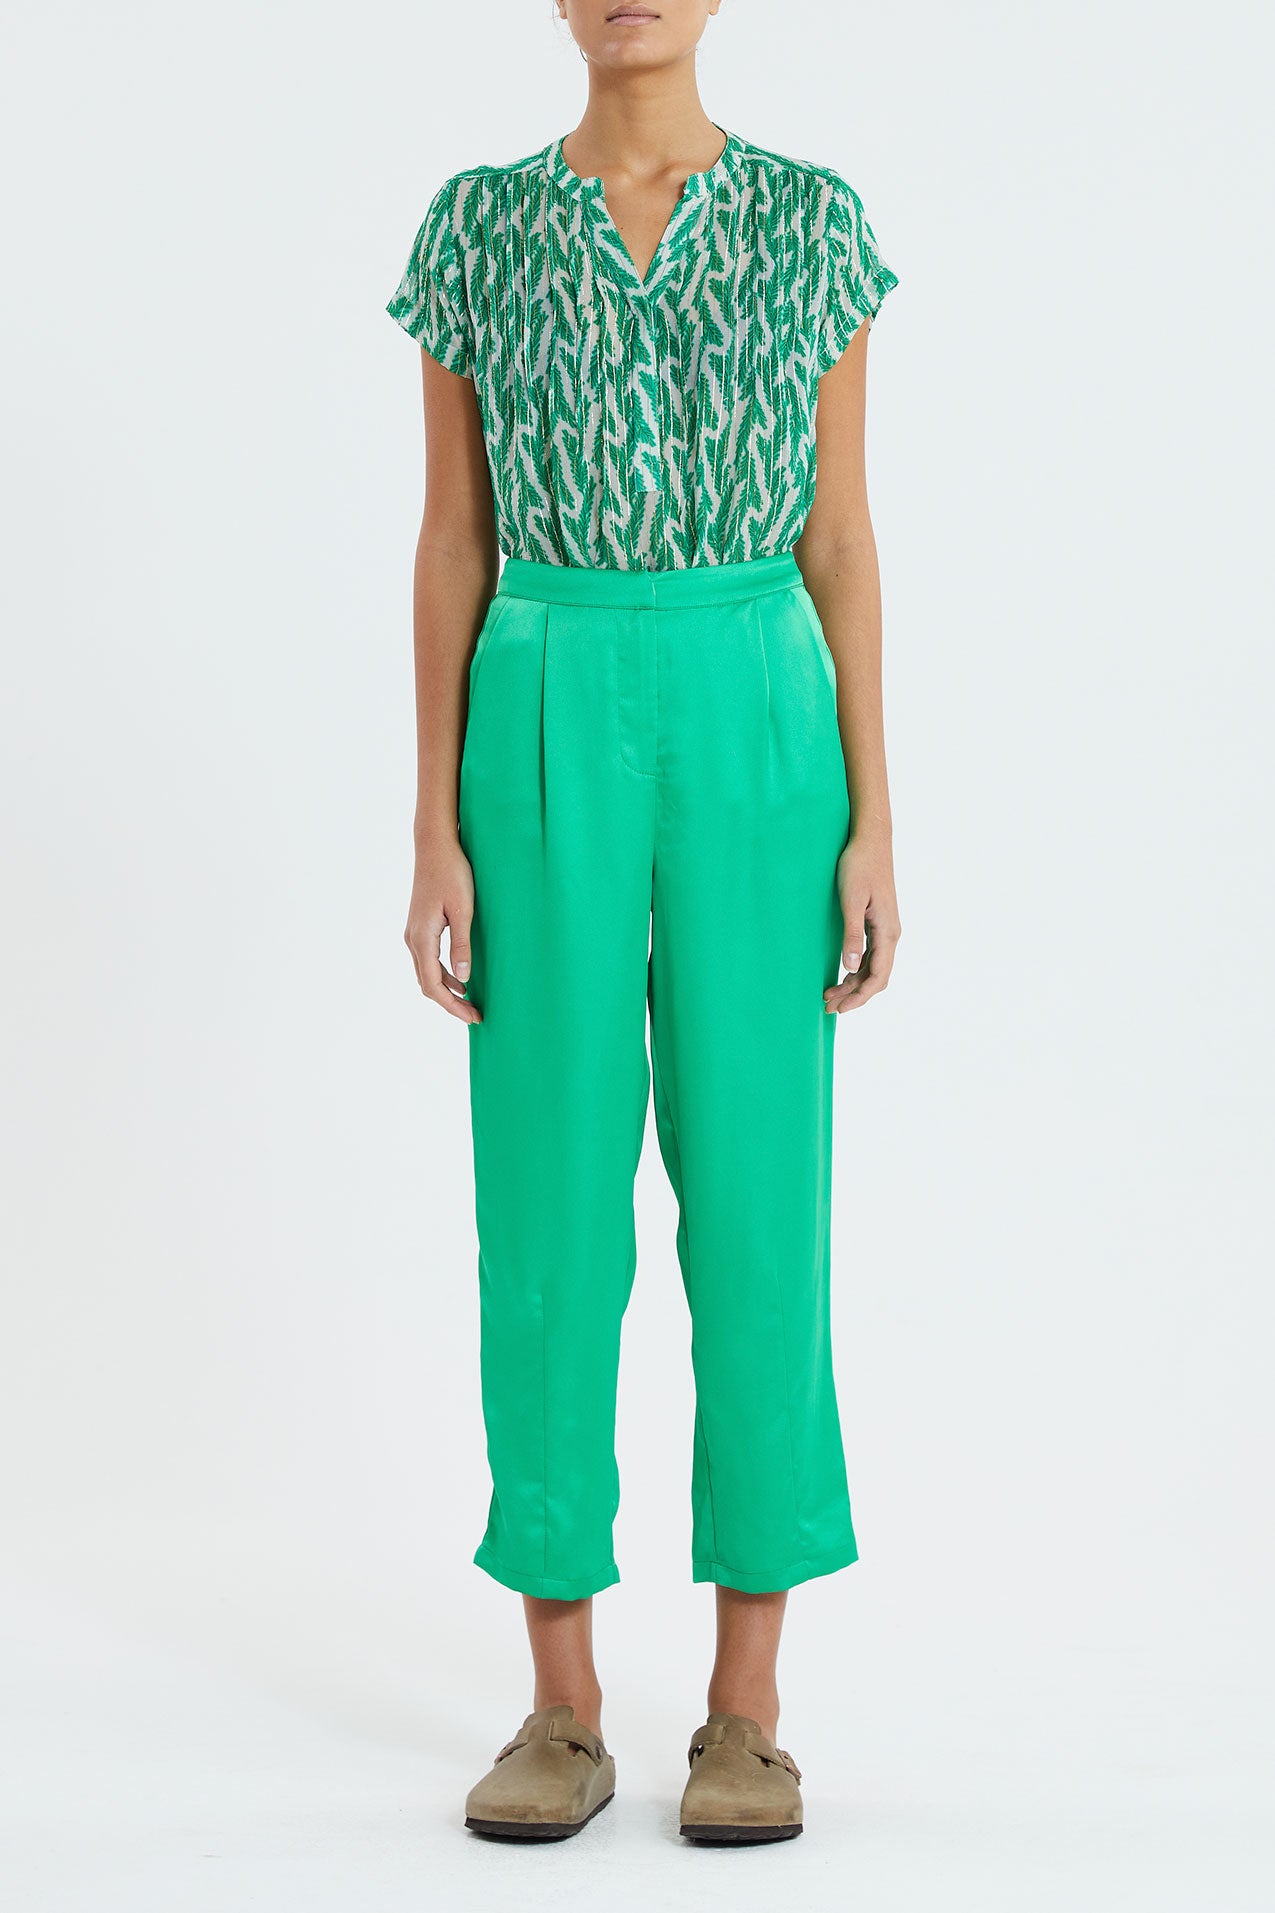 Lollys Laundry Heather Top Top 40 Green